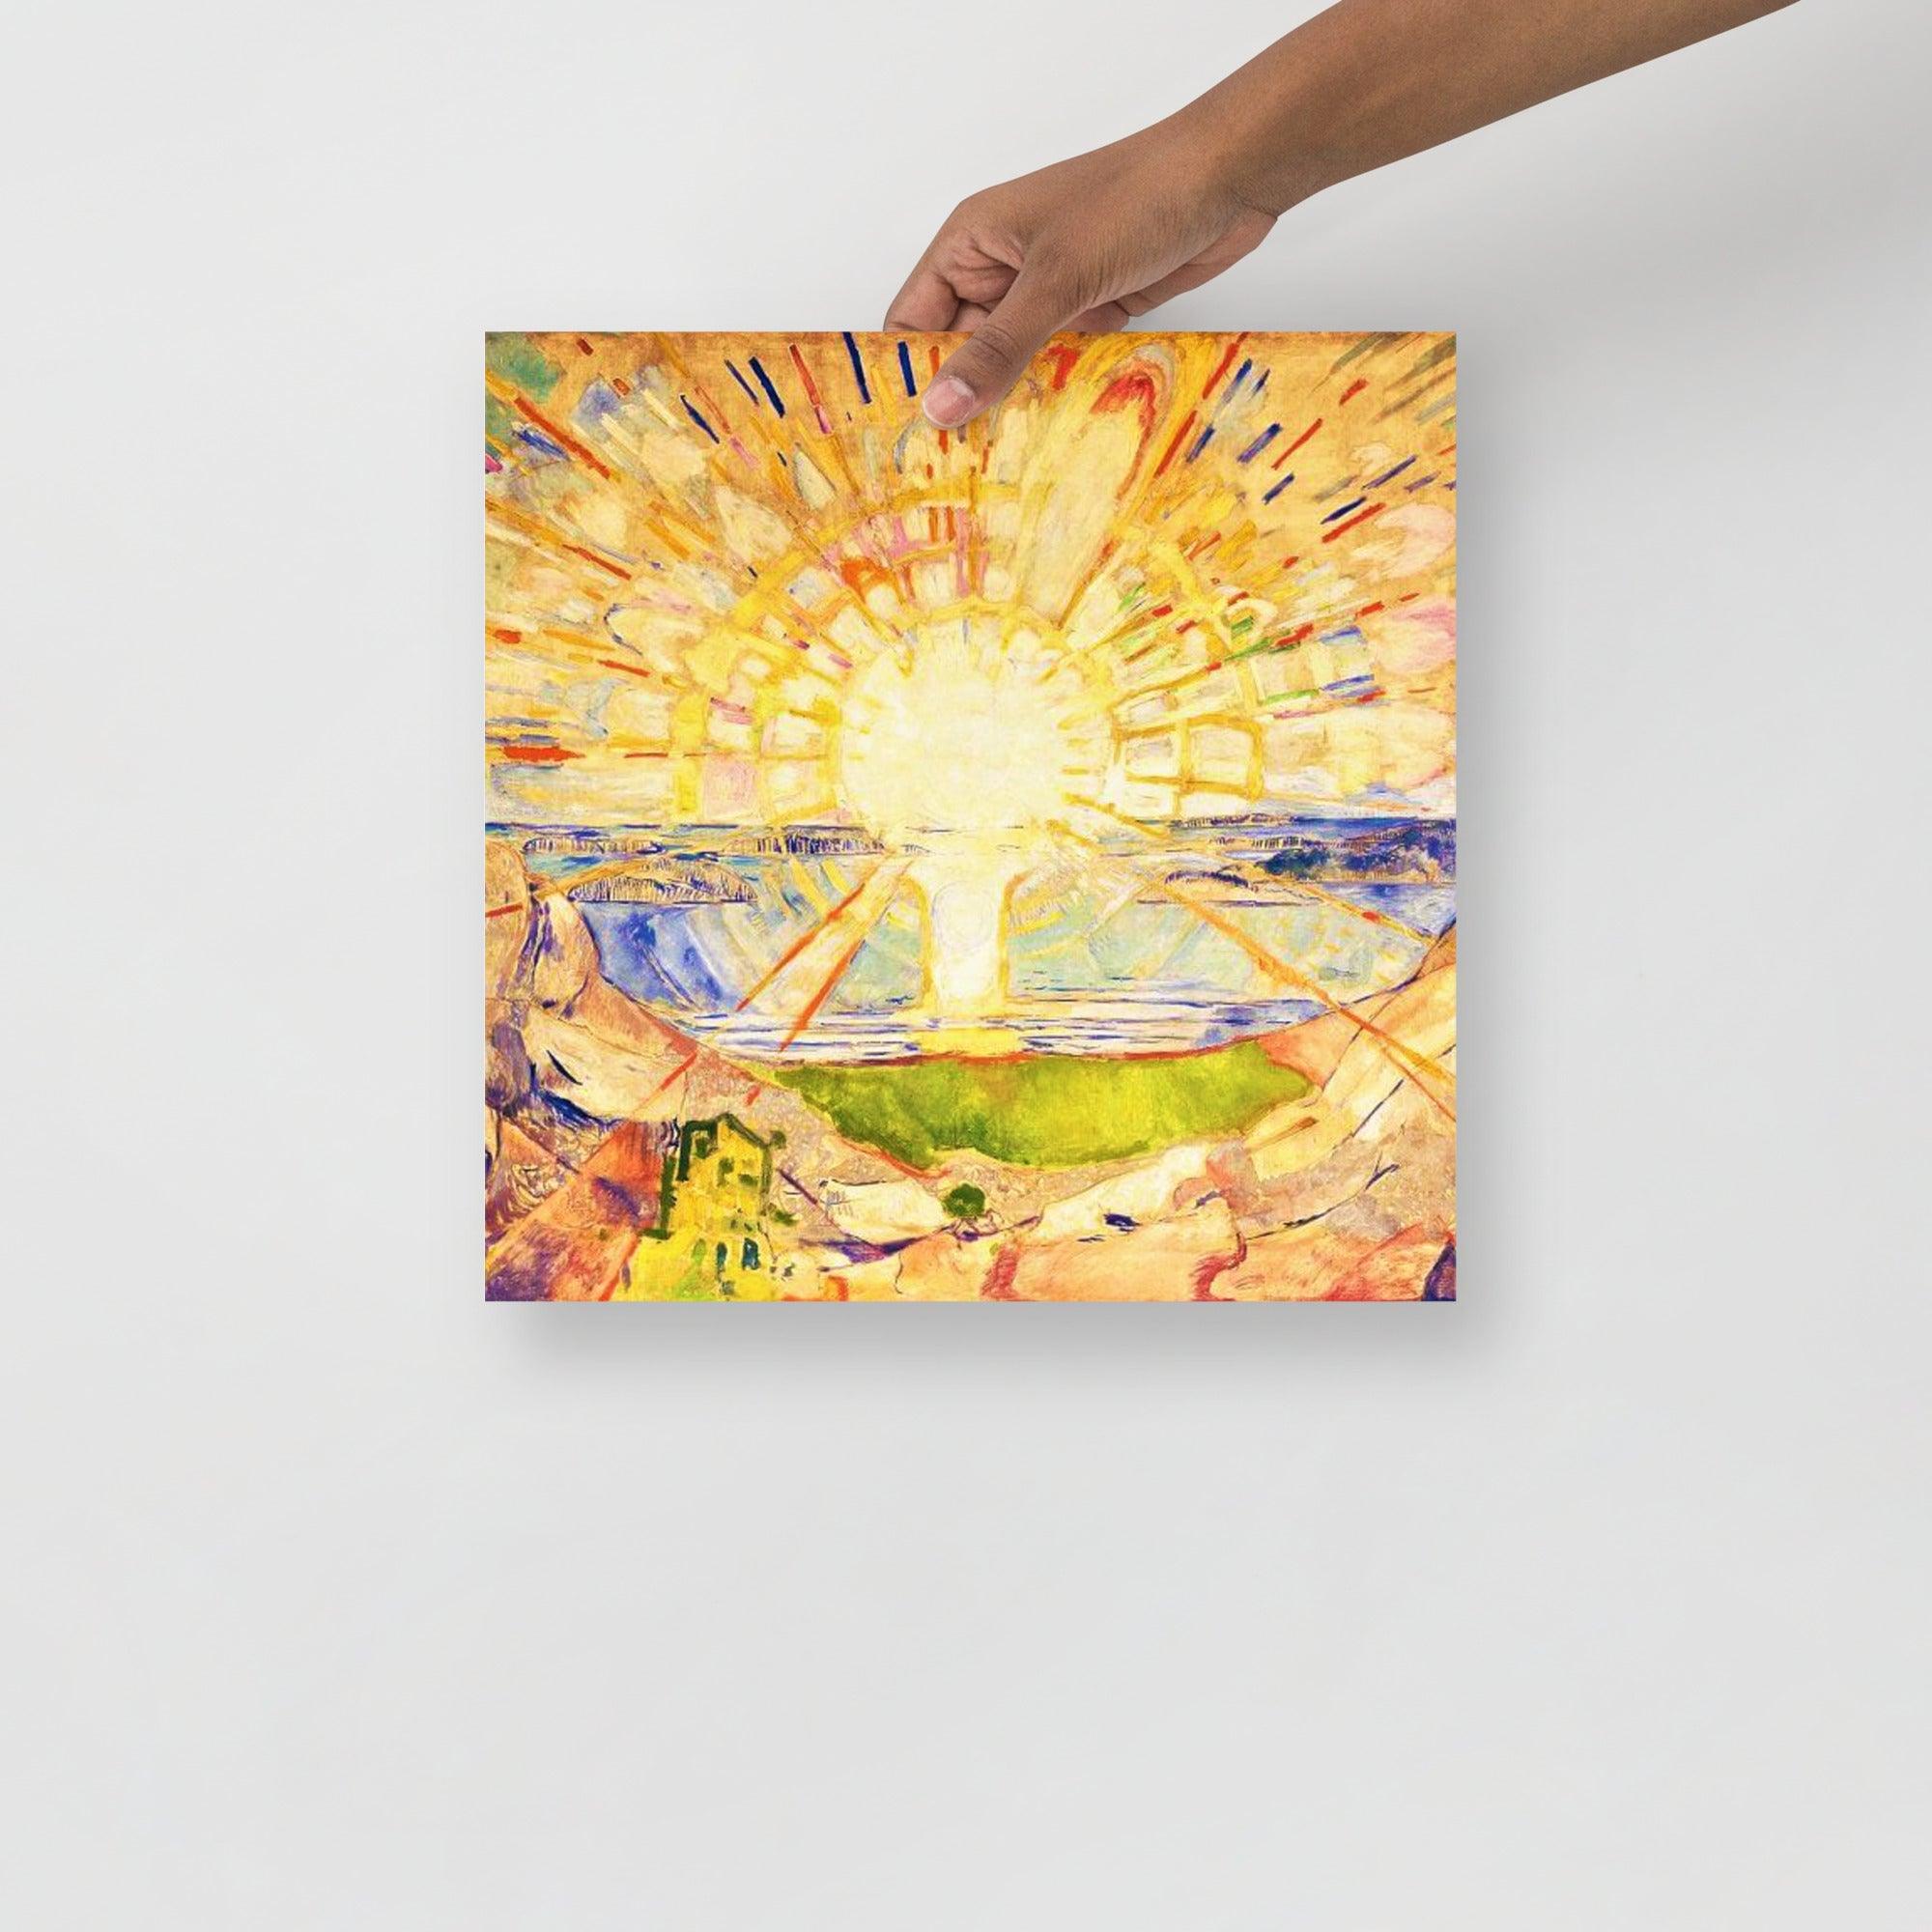 The Sun By Edvard Munch poster on a plain backdrop in size 14x14”.